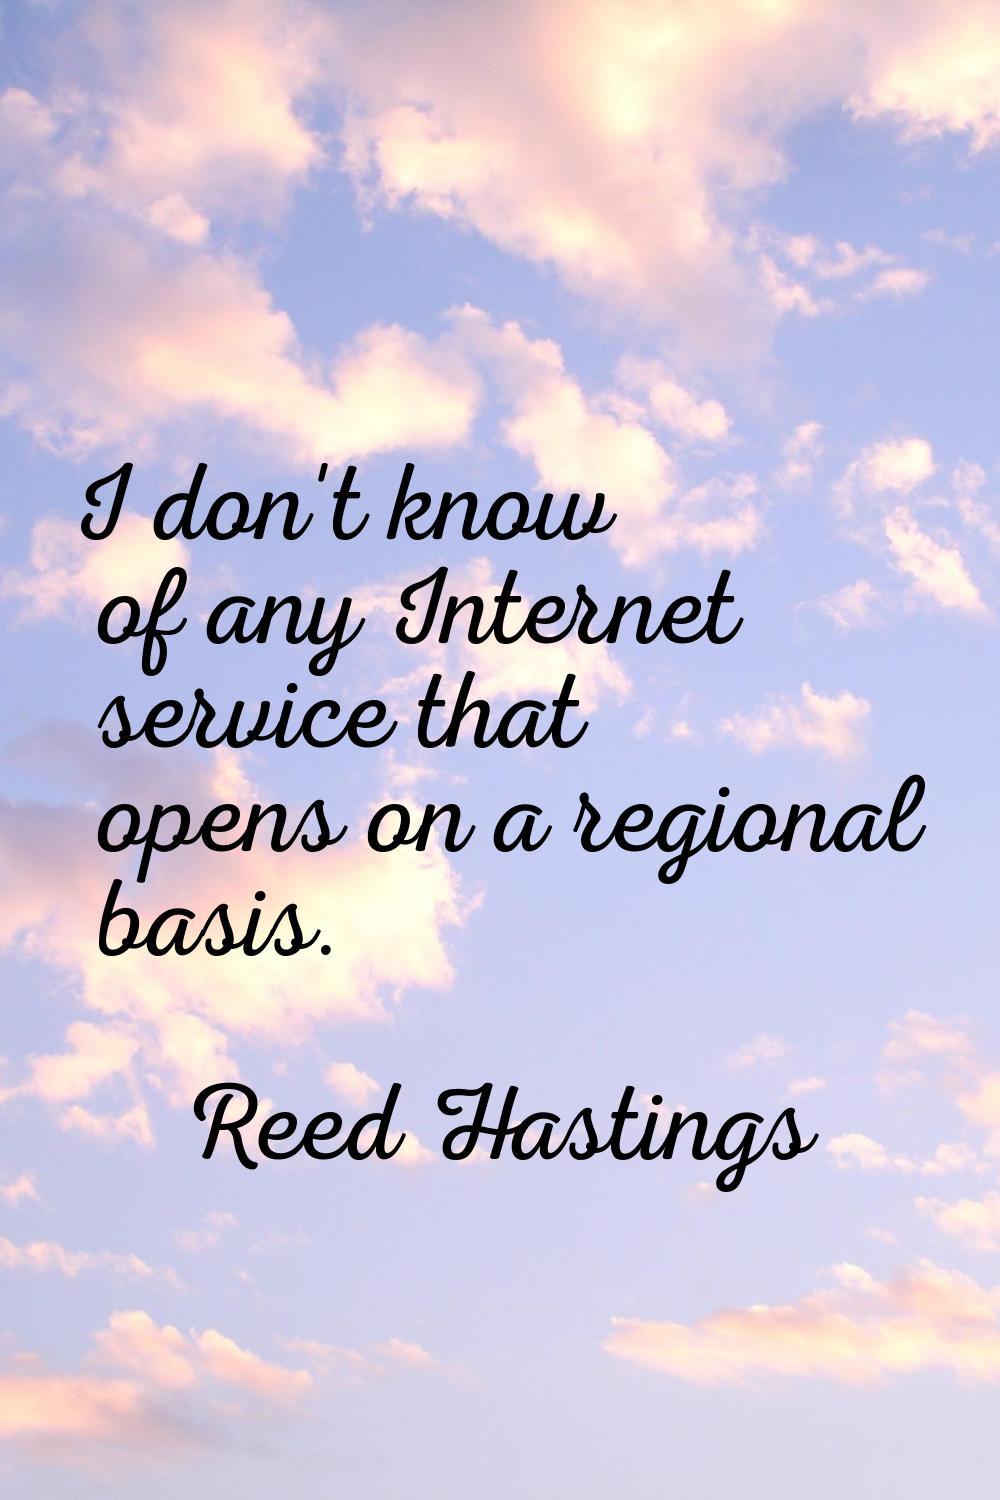 I don't know of any Internet service that opens on a regional basis.